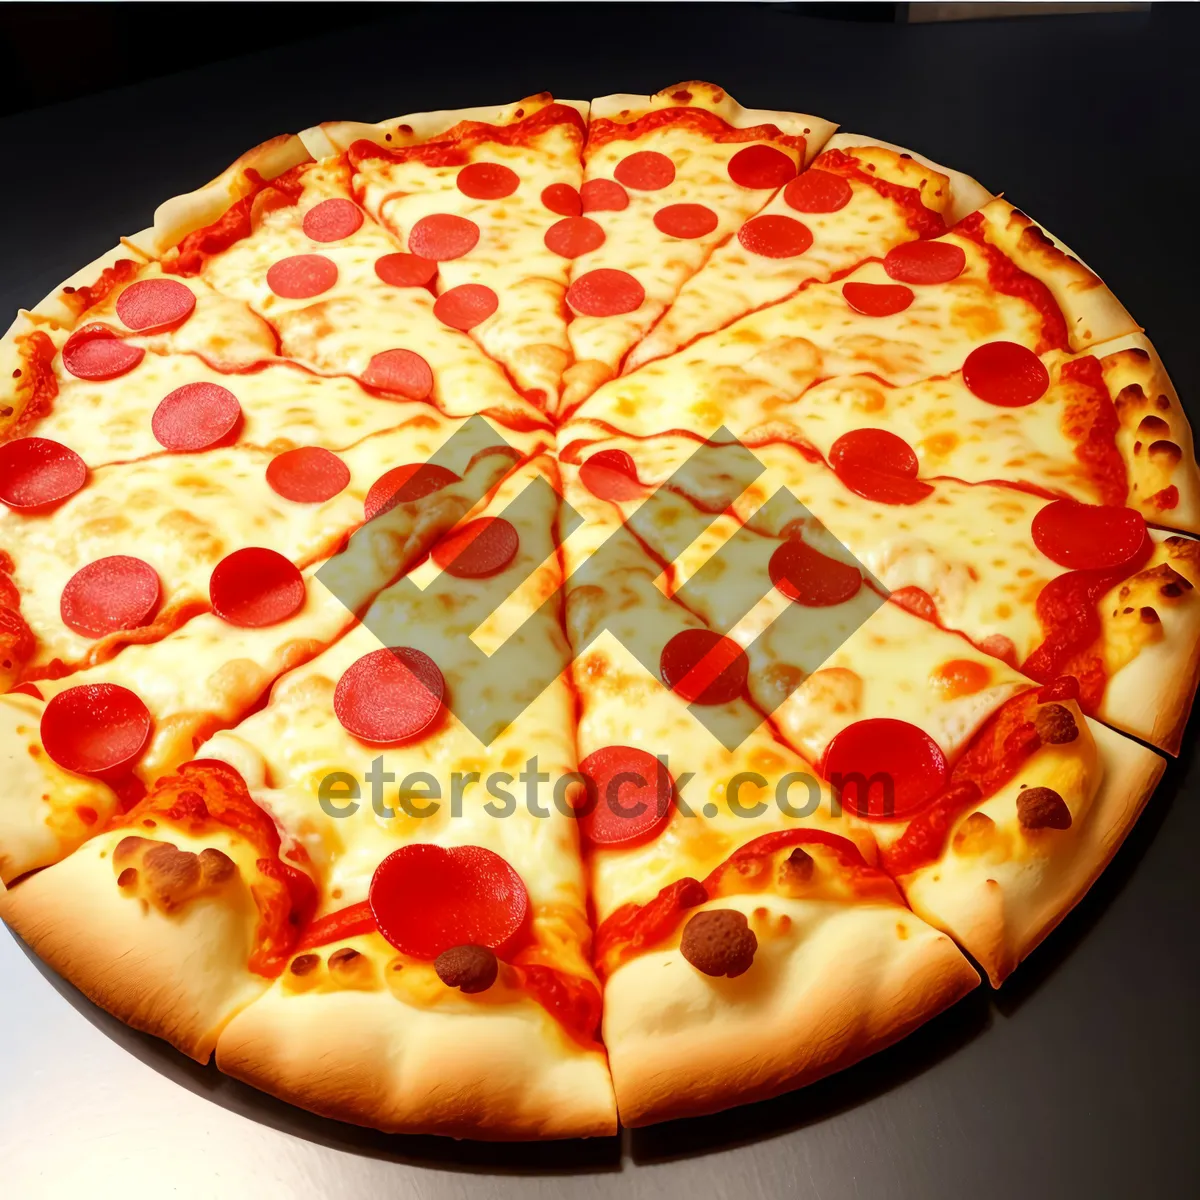 Picture of Gourmet Pizza: Delicious, Cheesy, and Mouthwatering